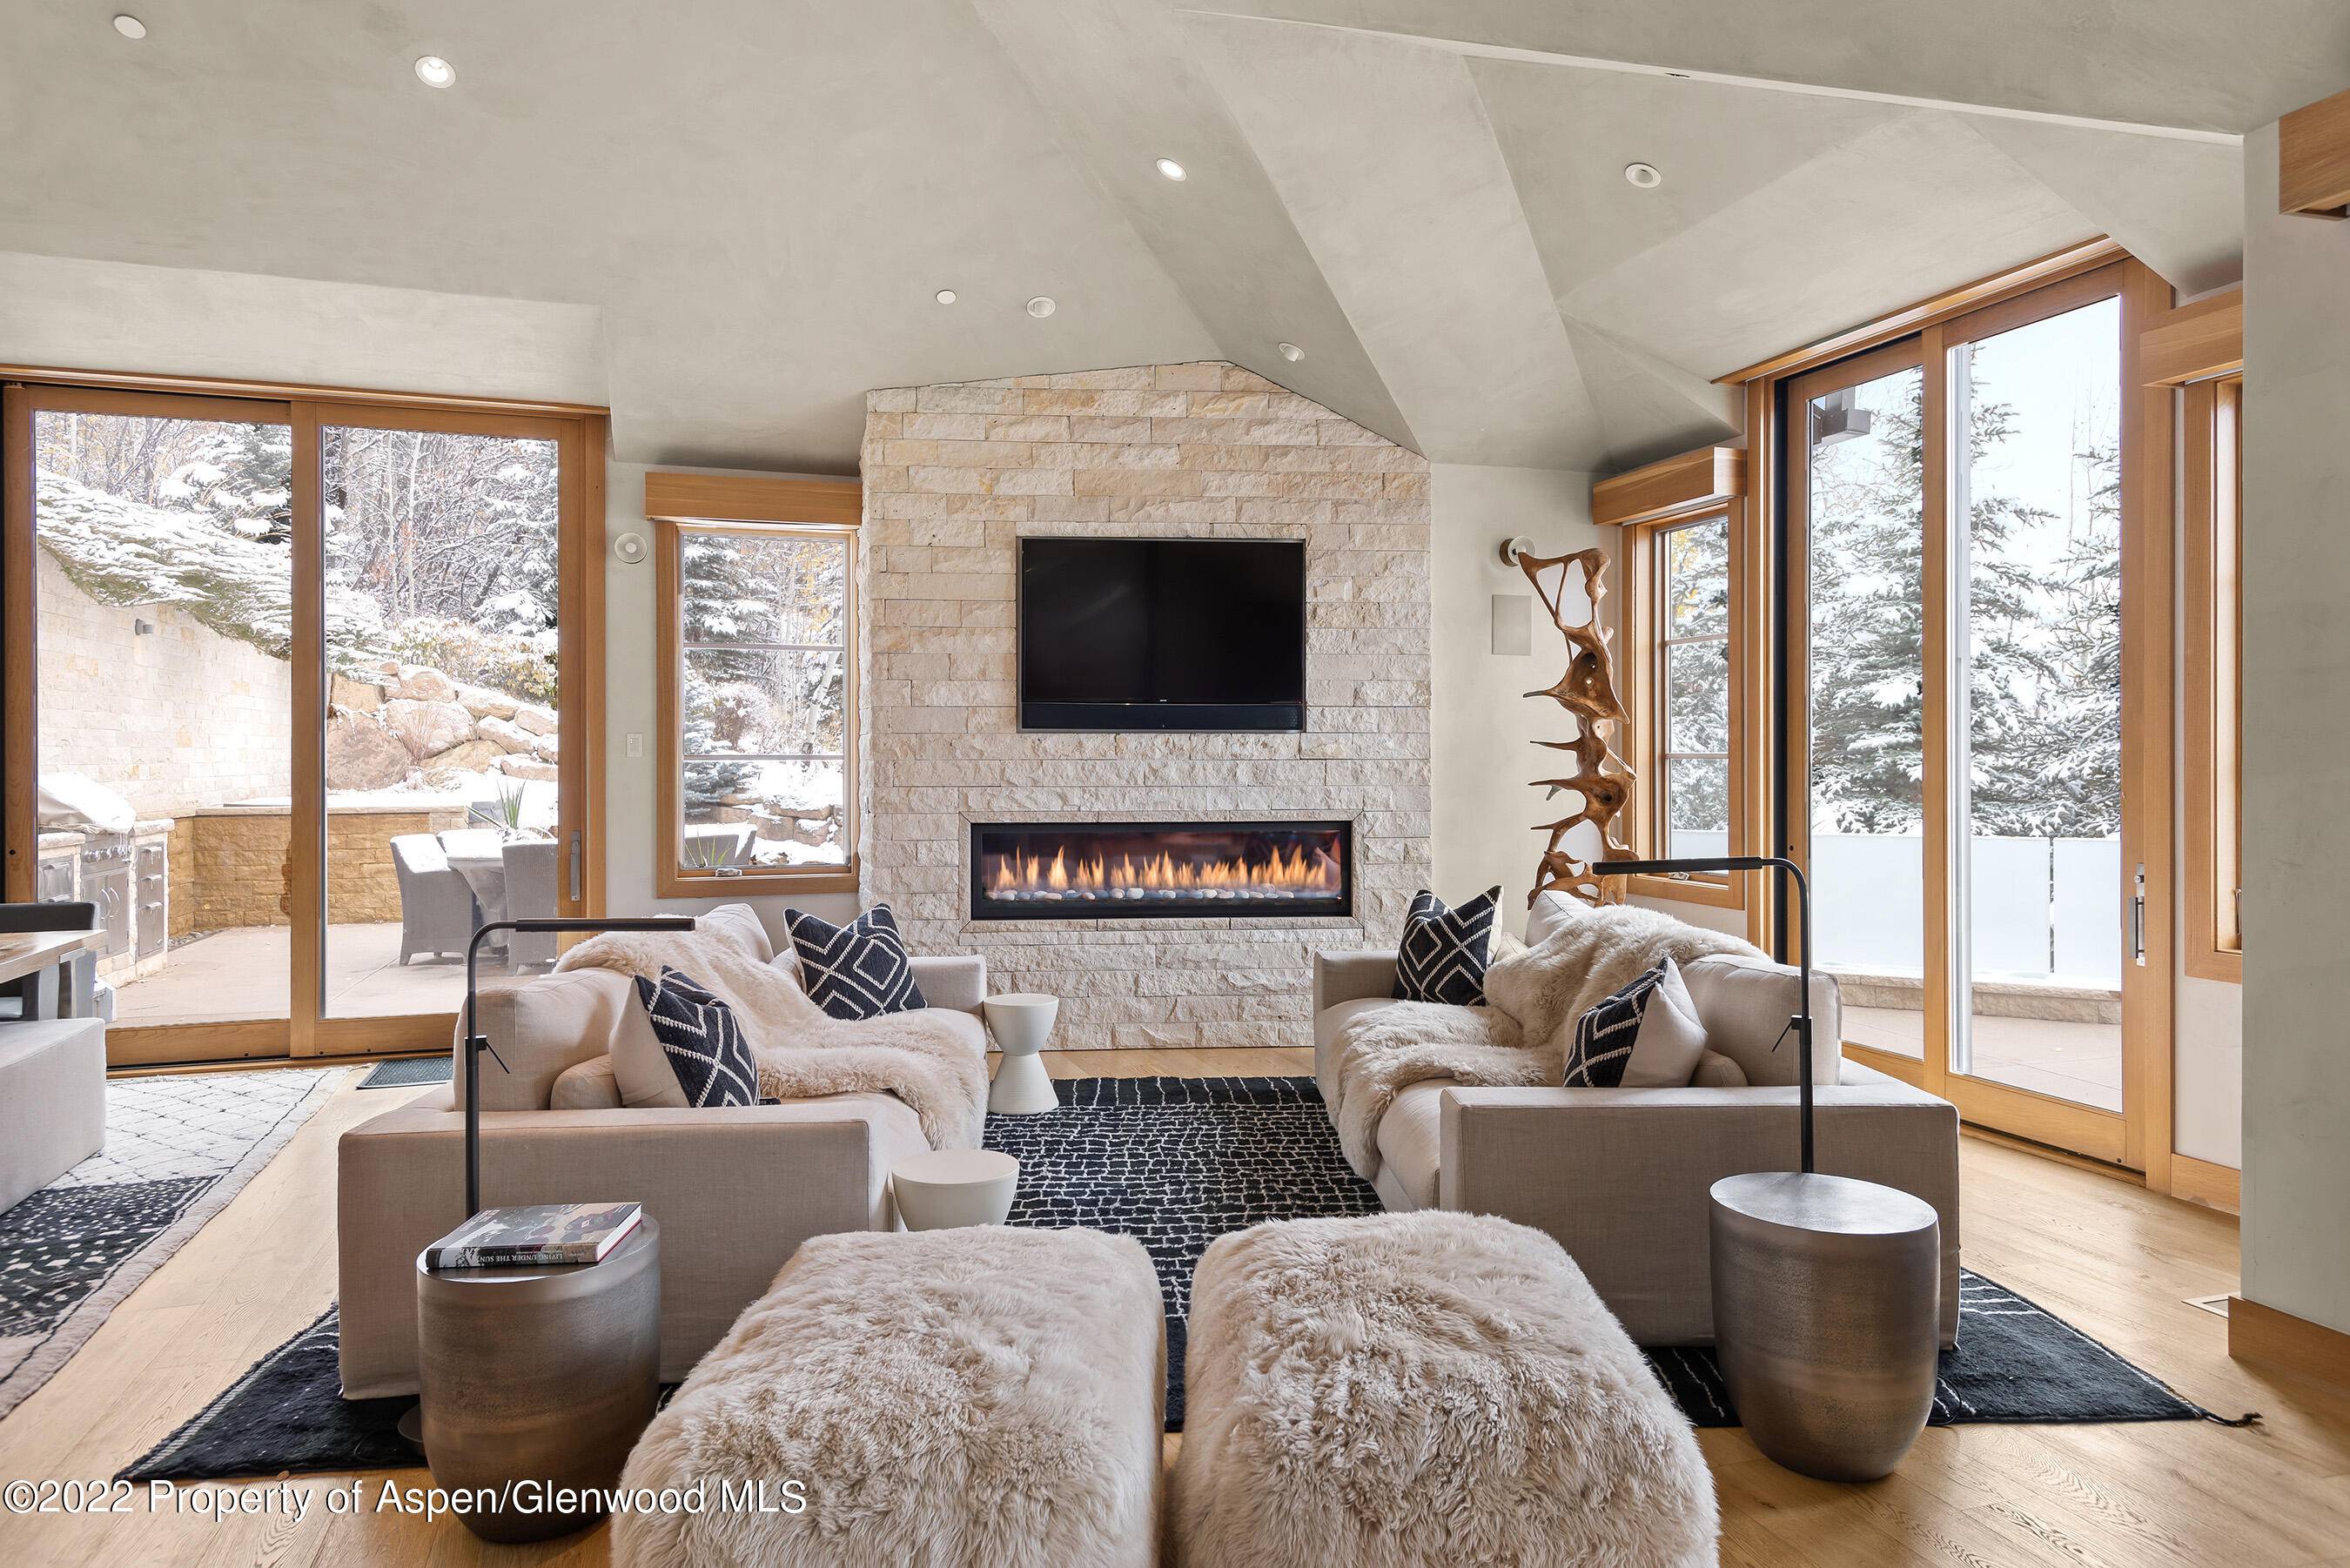 A stunning contemporary home in the Knollwood enclave of East Aspen.